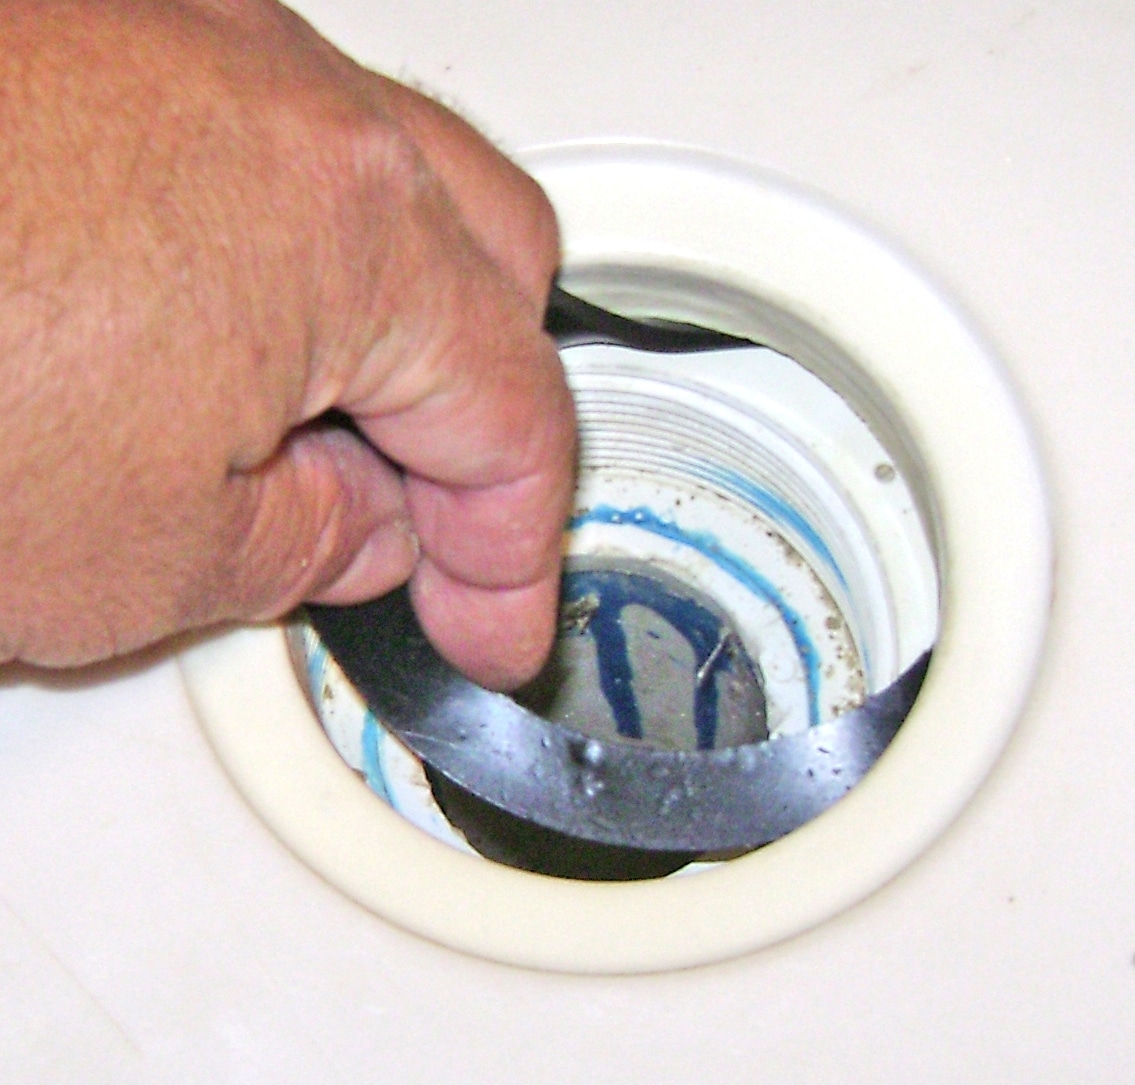 How To Fix A Leaky Shower Drain Install The New Gasket And Drain